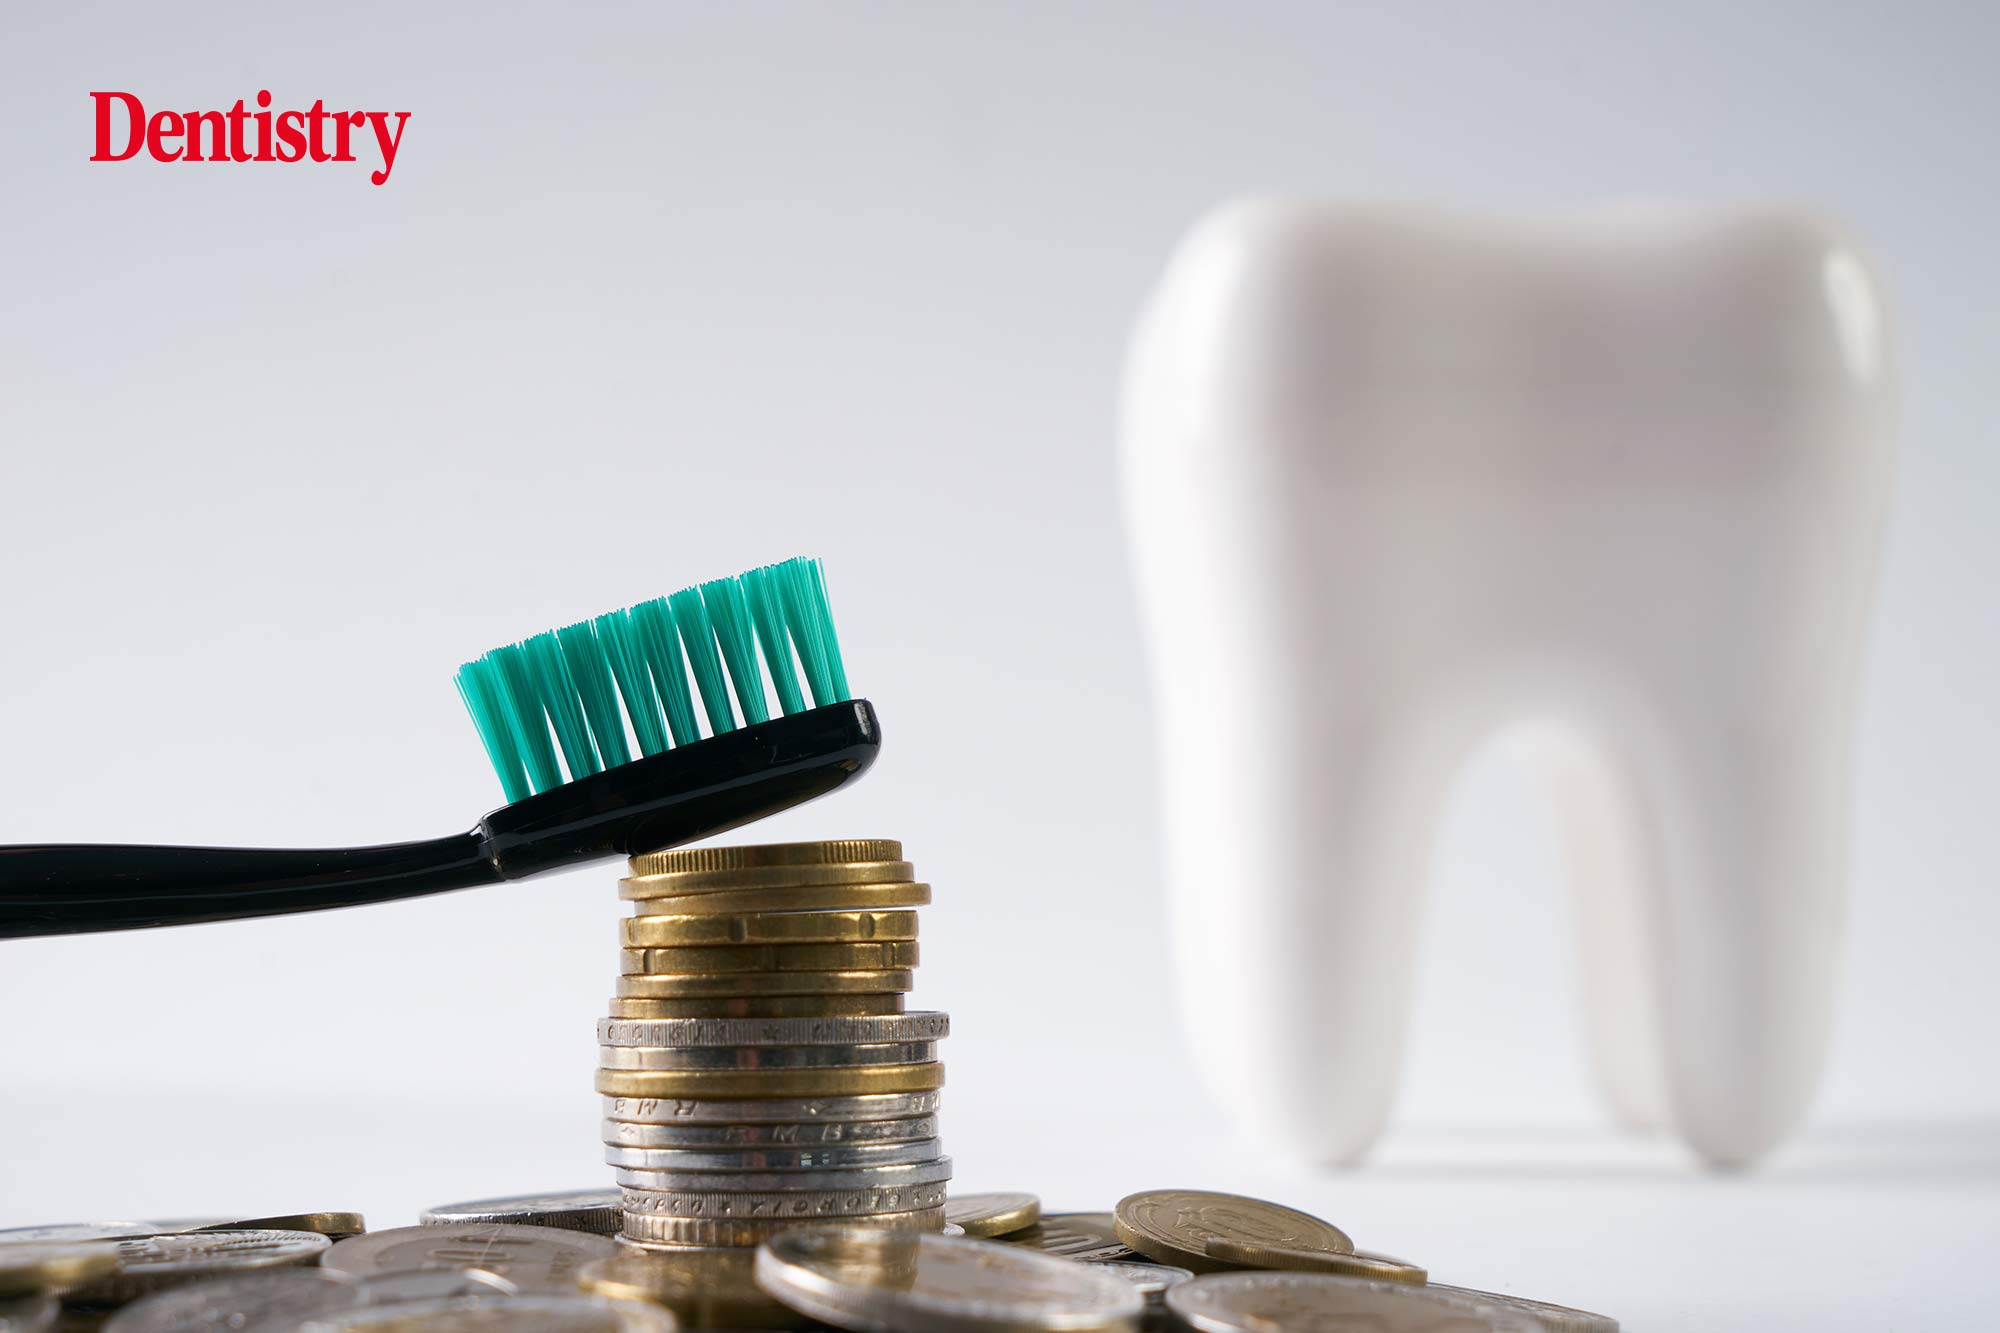 Government set to take 100s of millions from NHS dentistry, says BDA